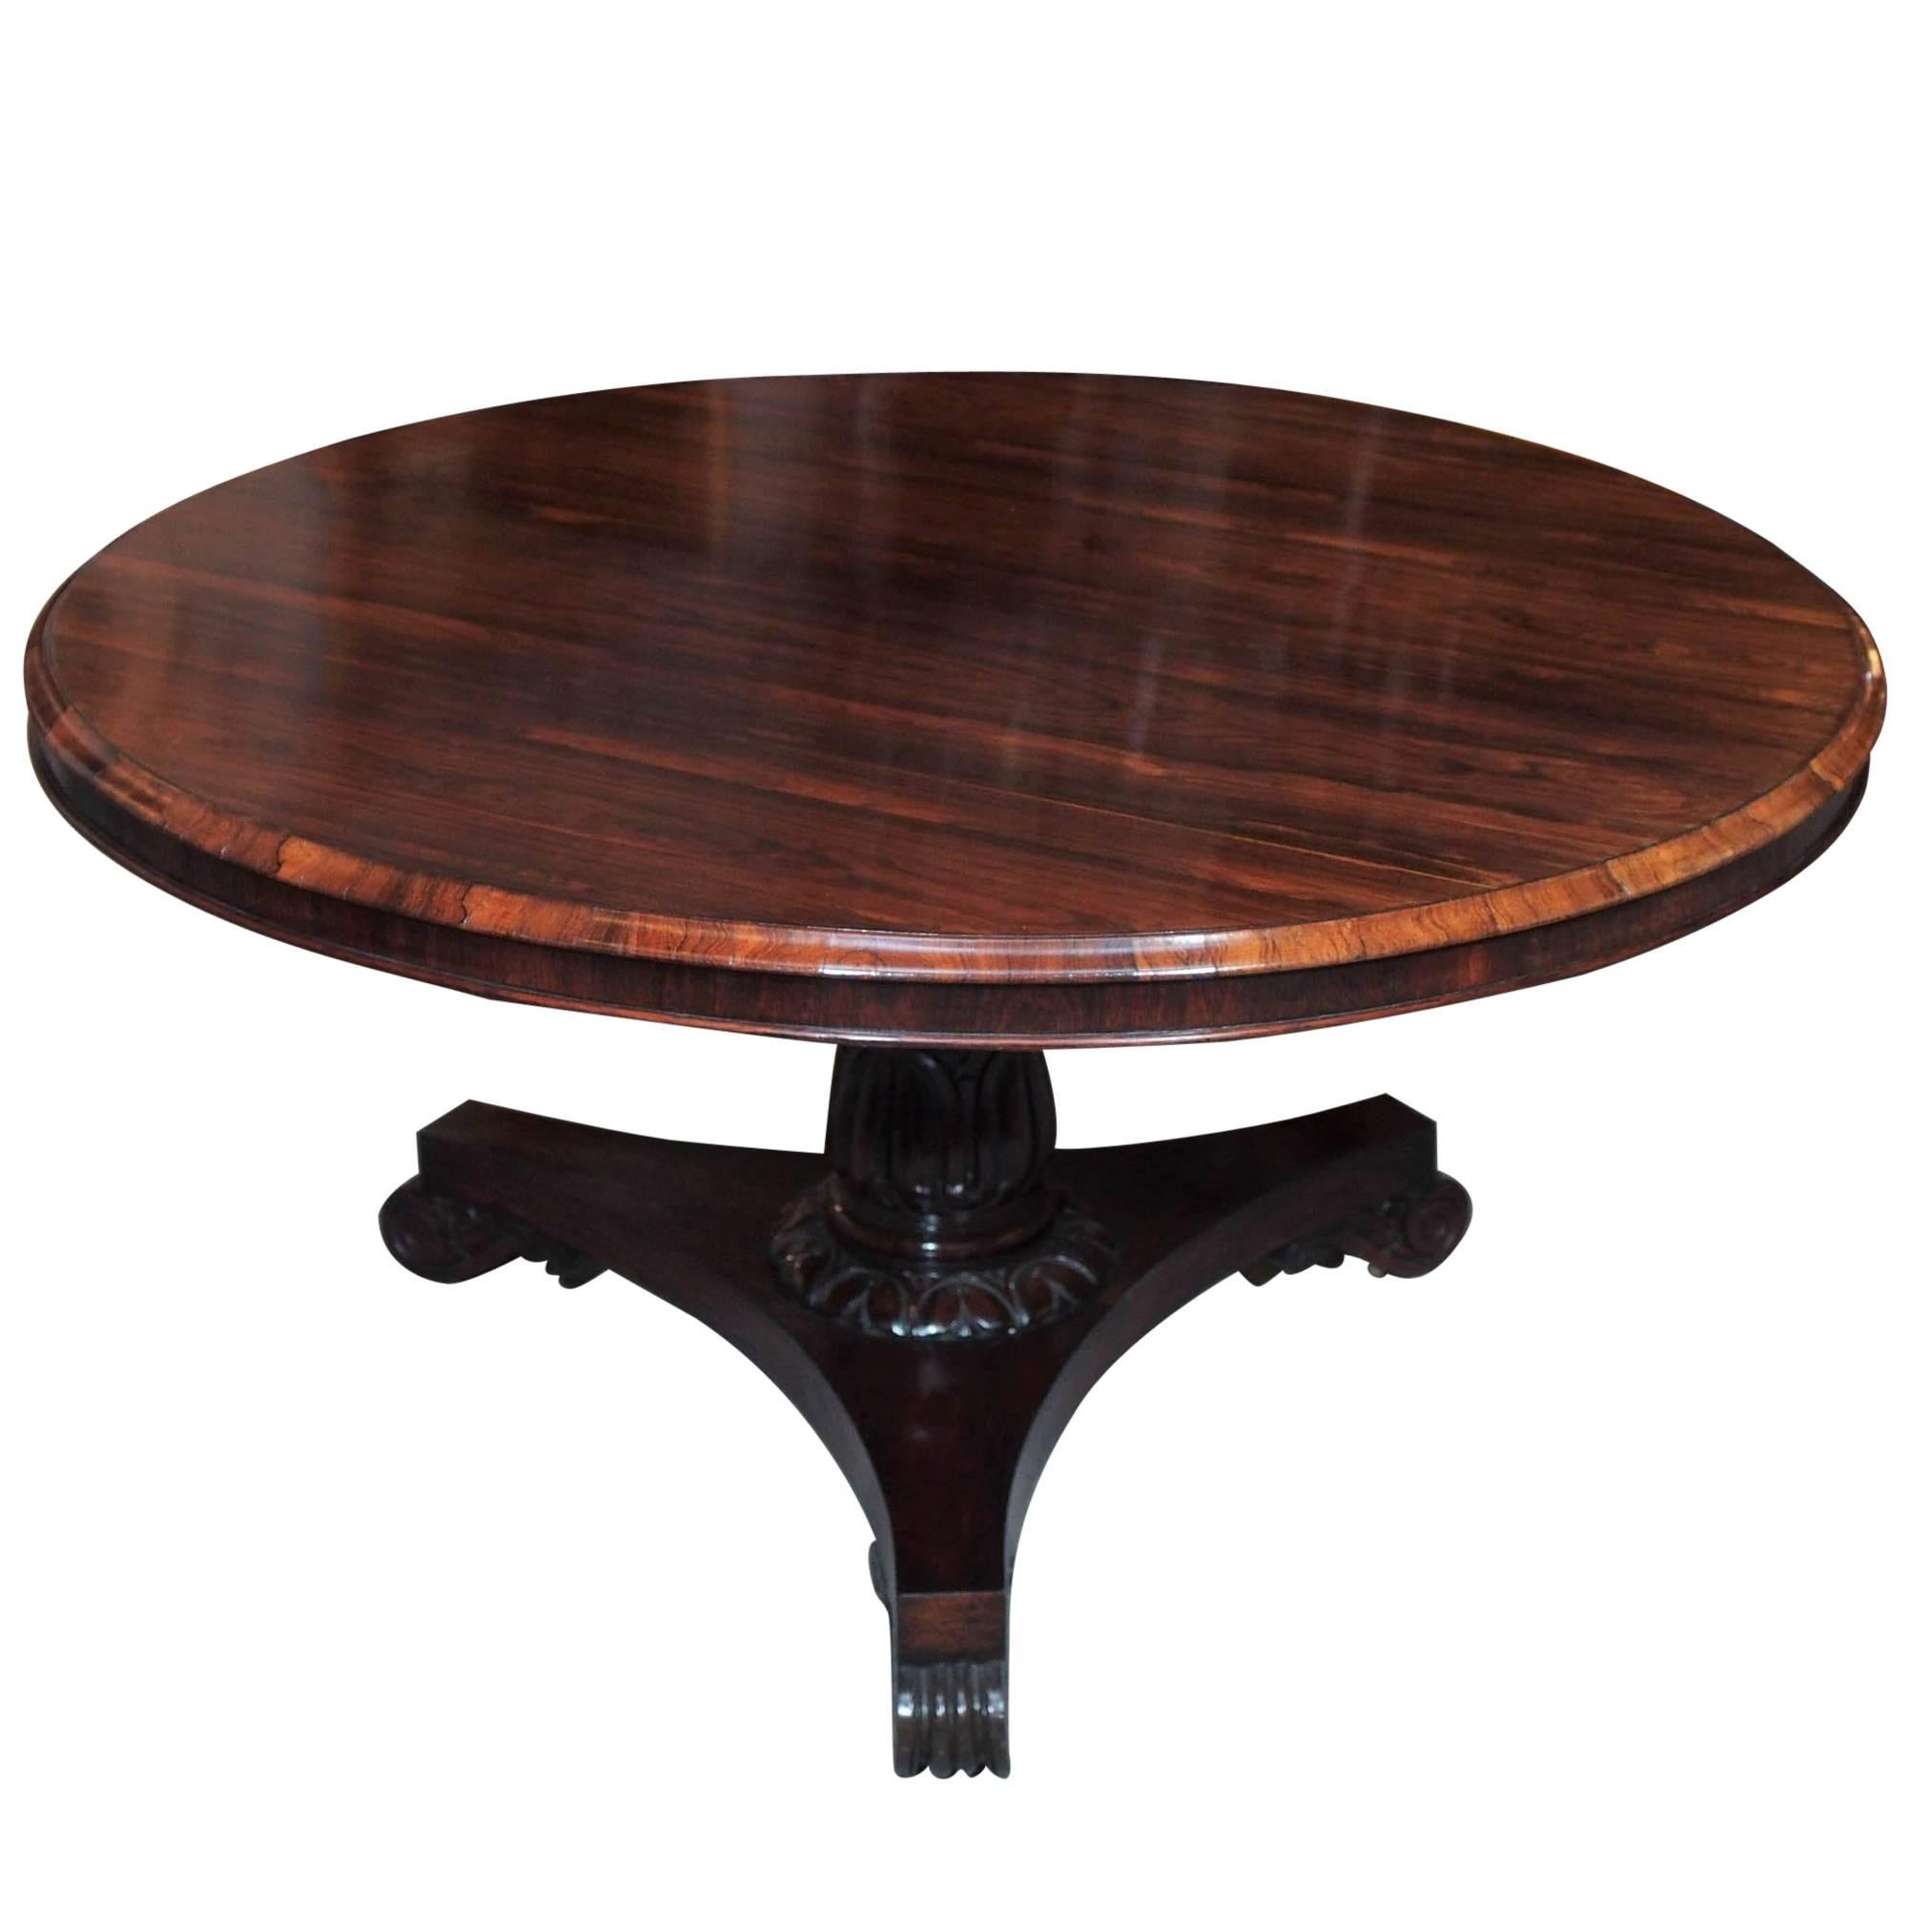 Antique English Regency Rosewood Centre Table